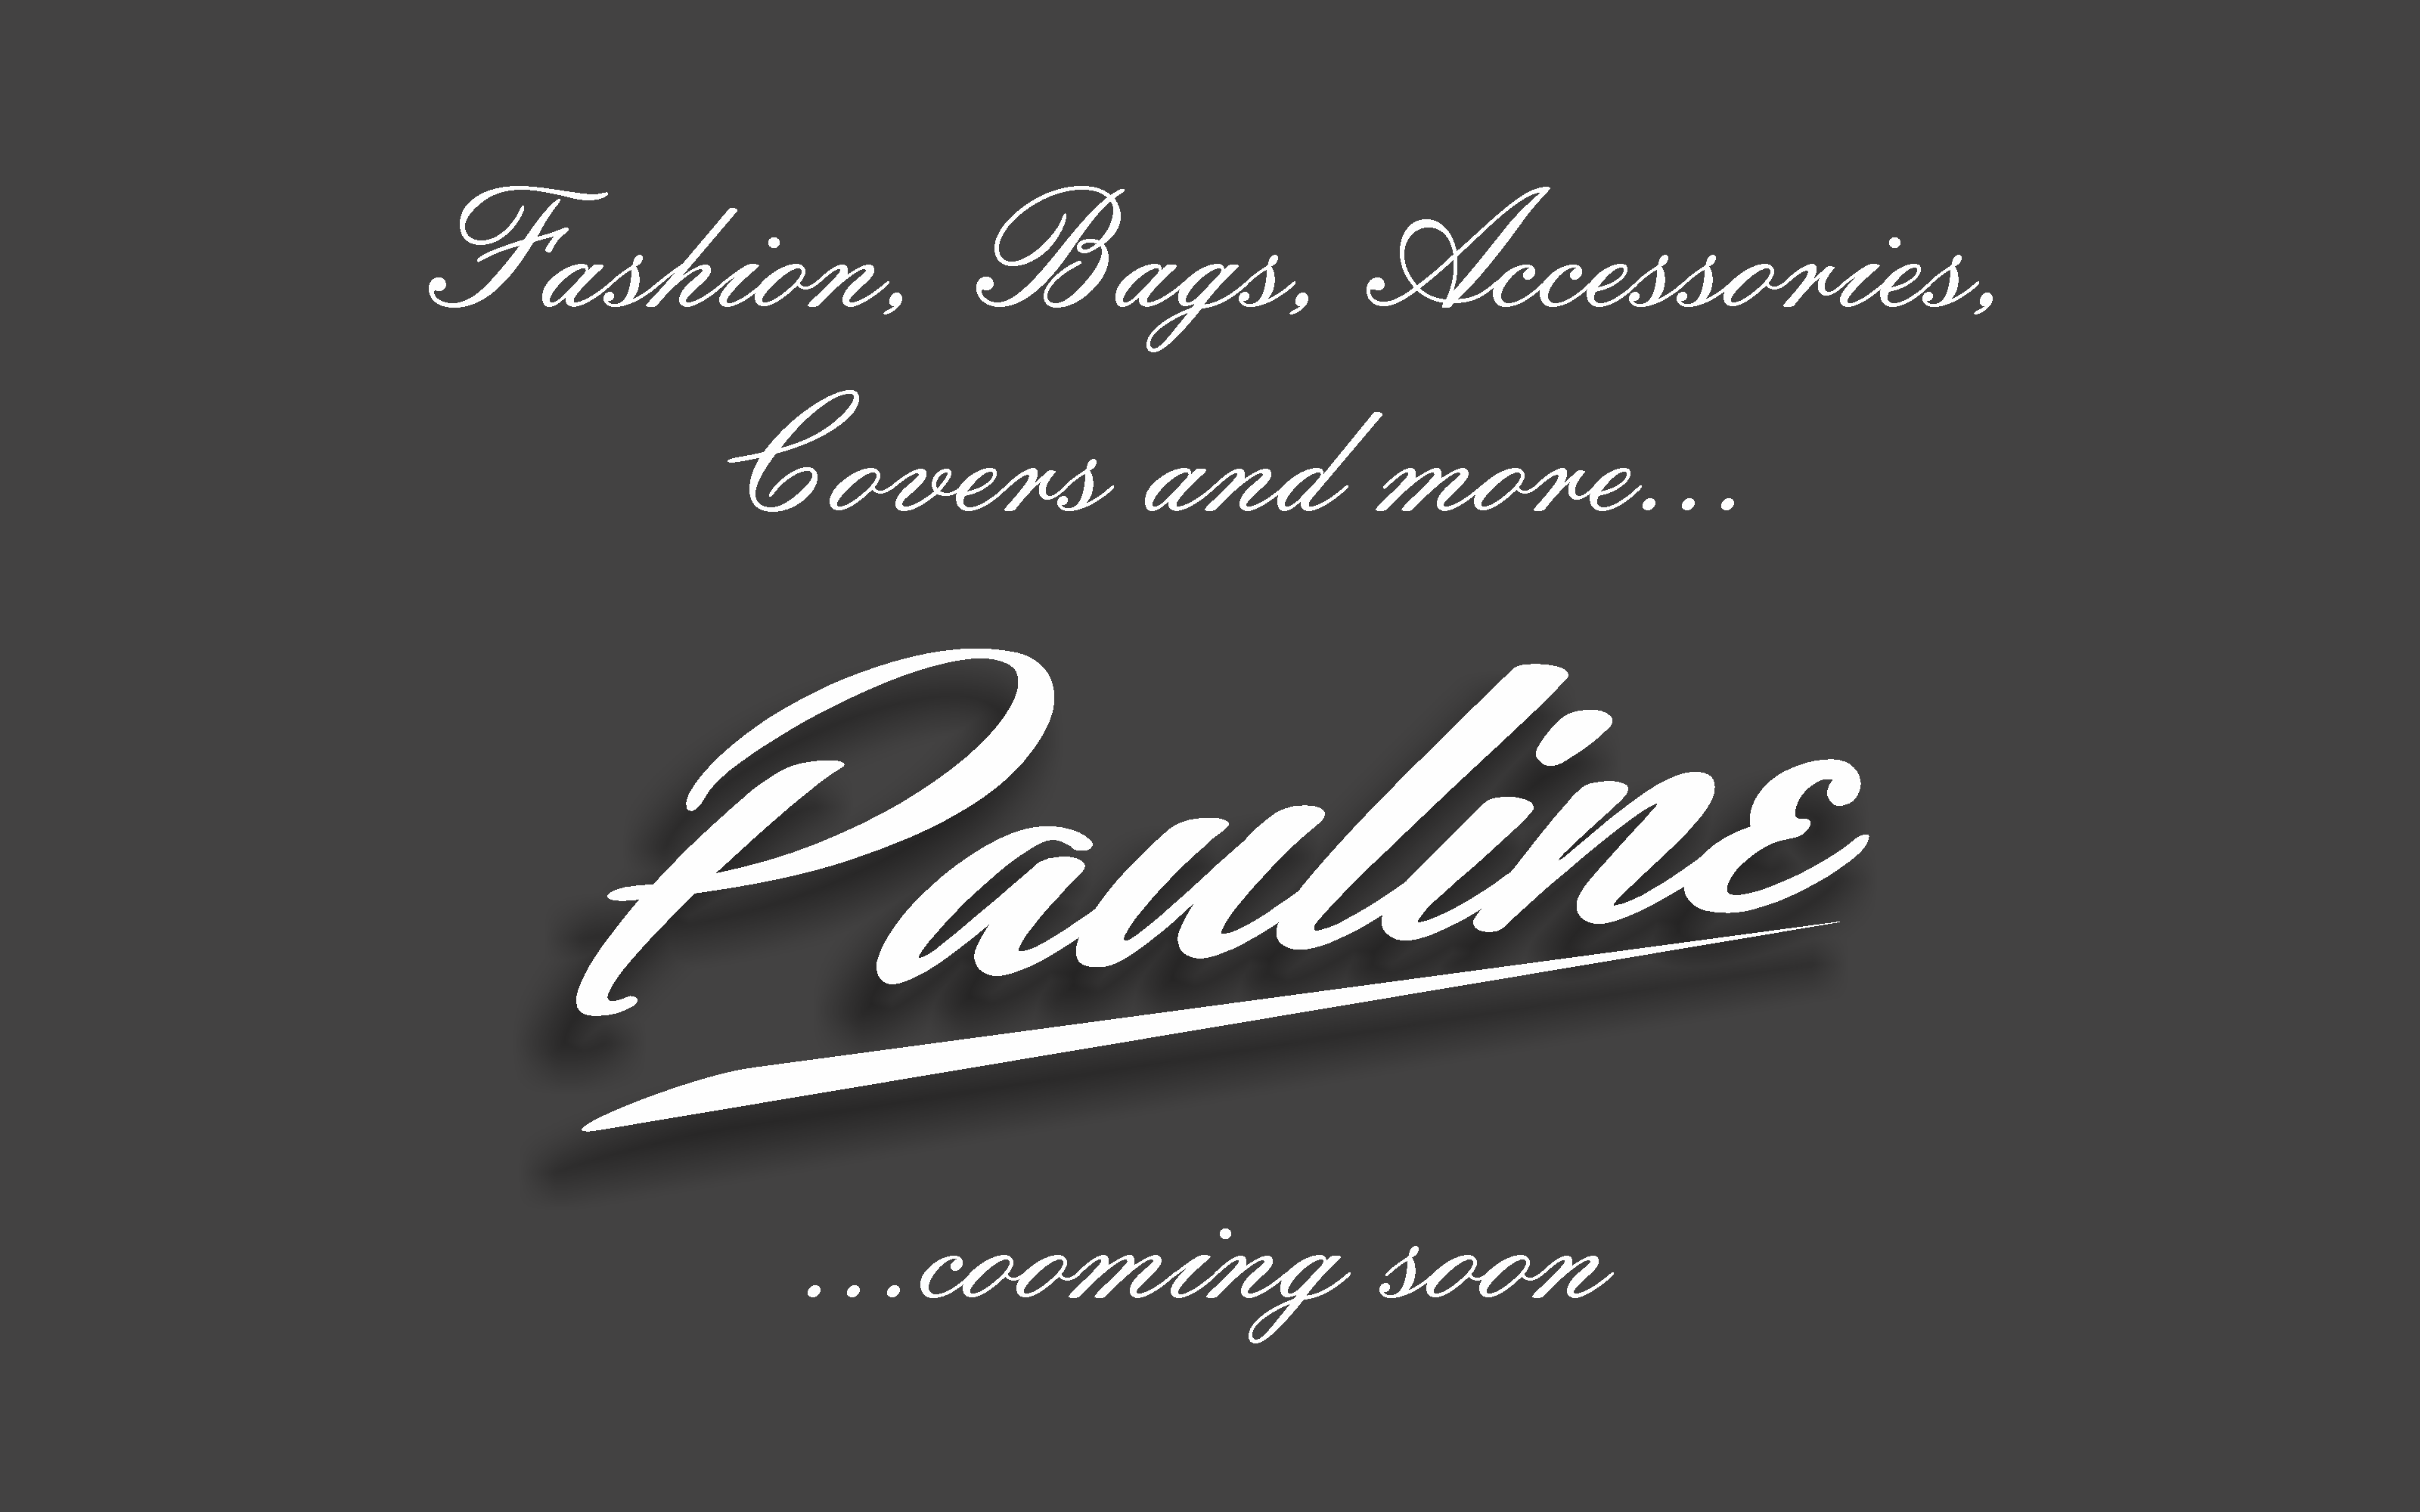 Fashion, Bags, Accessories, Cover and more...